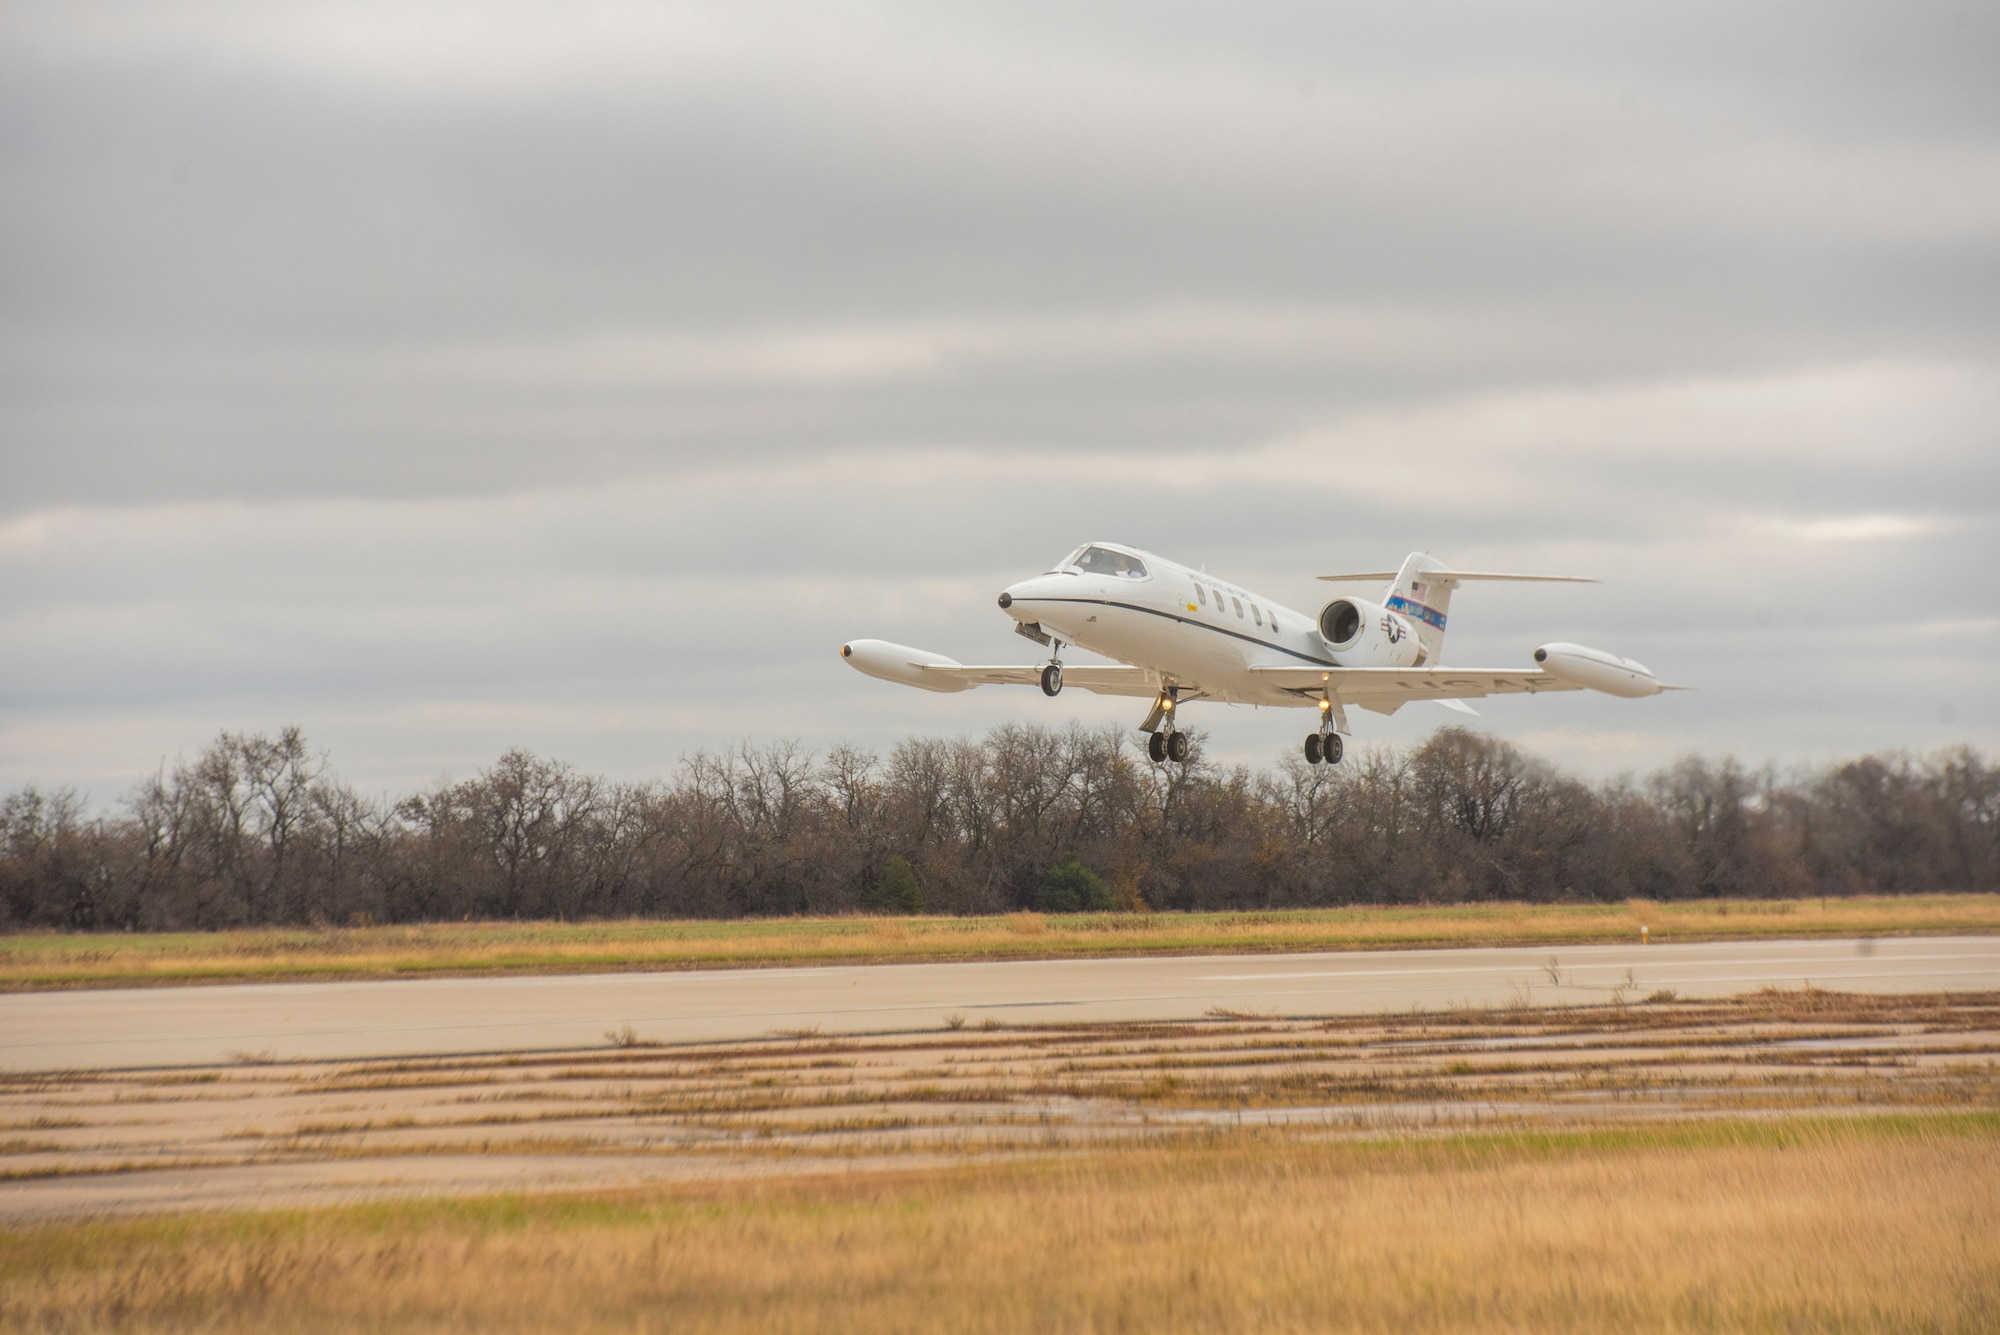 The first C-21A to acquire new “delta fins” takes off Nov. 10, 2020, from Newton City Airport, Kansas. With first model upgrades successfully stabilizing the aircraft, the rest of the fleet will soon follow, allowing the C-21A mission to continue for years to come. (U.S. Air Force photo by Staff Sgt. Nathan Eckert)